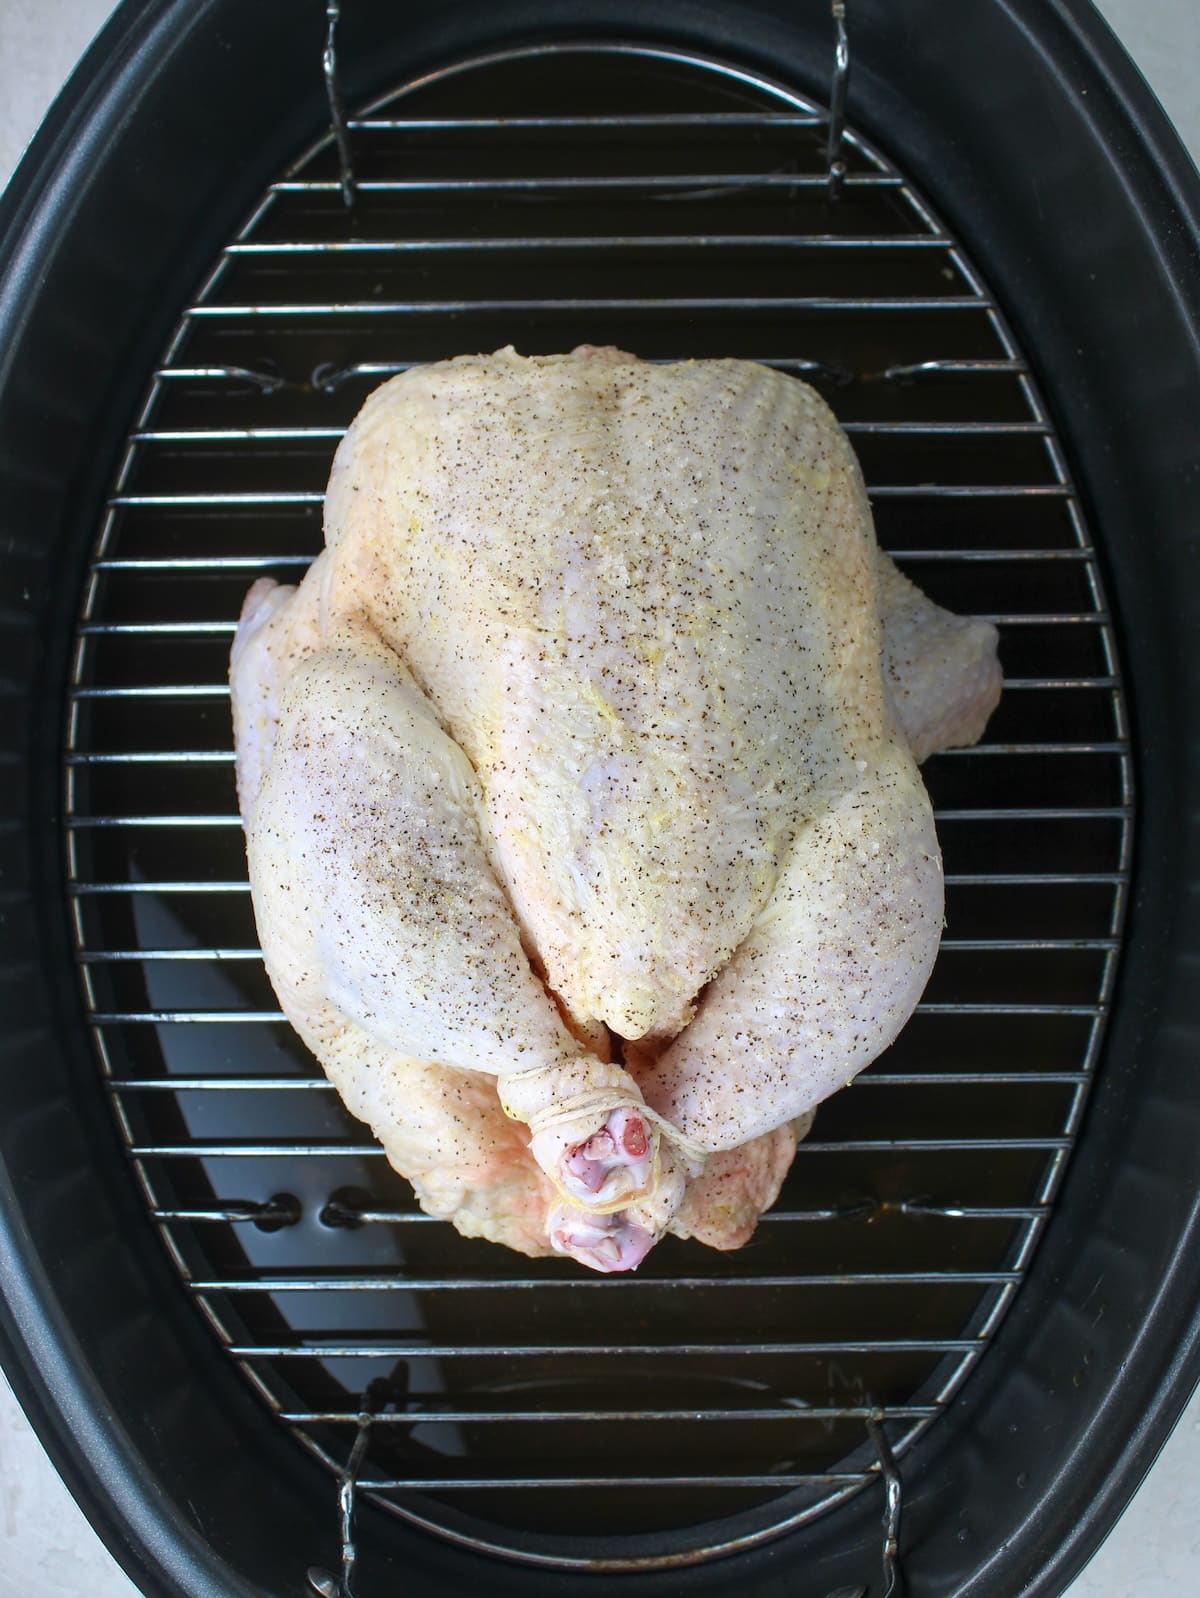 A raw whole chicken in a roasting pan, ready to be cooked in the oven.